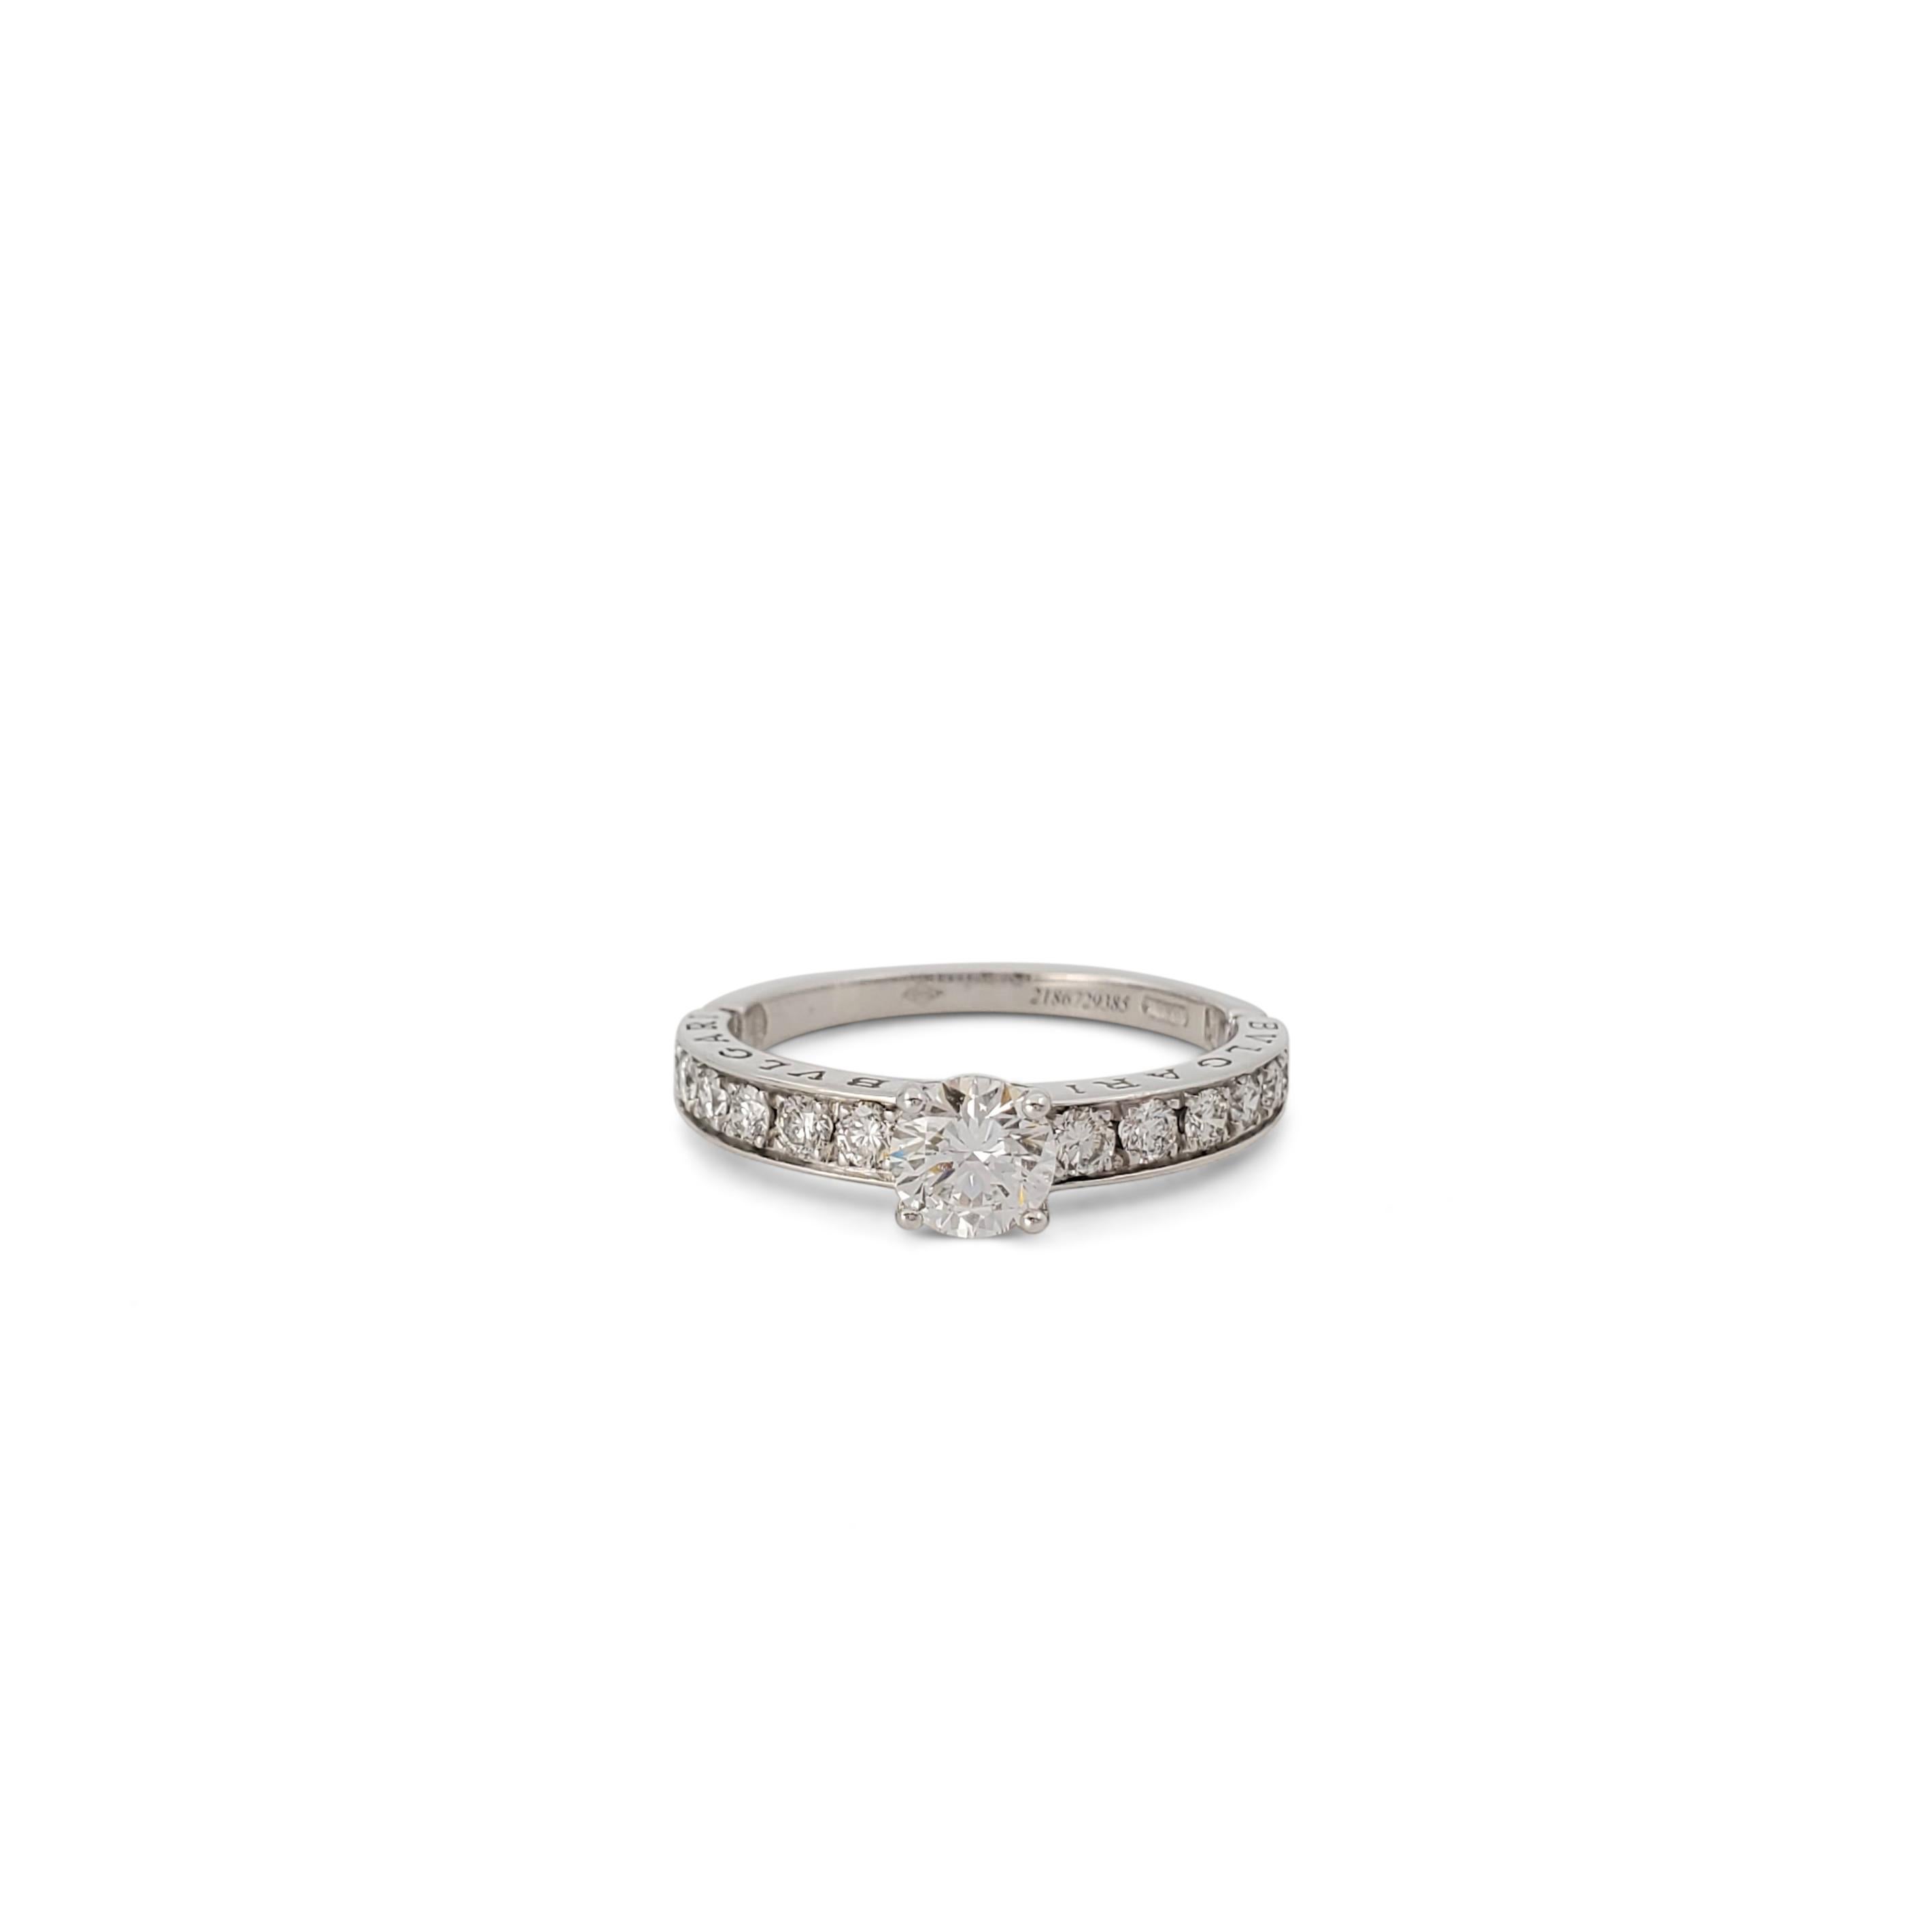 Authentic Bvlgari engagement ring from the 'Dedicata a Venizia' collection crafted in platinum features a four-prong set round brilliant cut diamond weighing 0.50 carat (D color, VS clarity) which is highlighted by an additional 0.65 carats of round